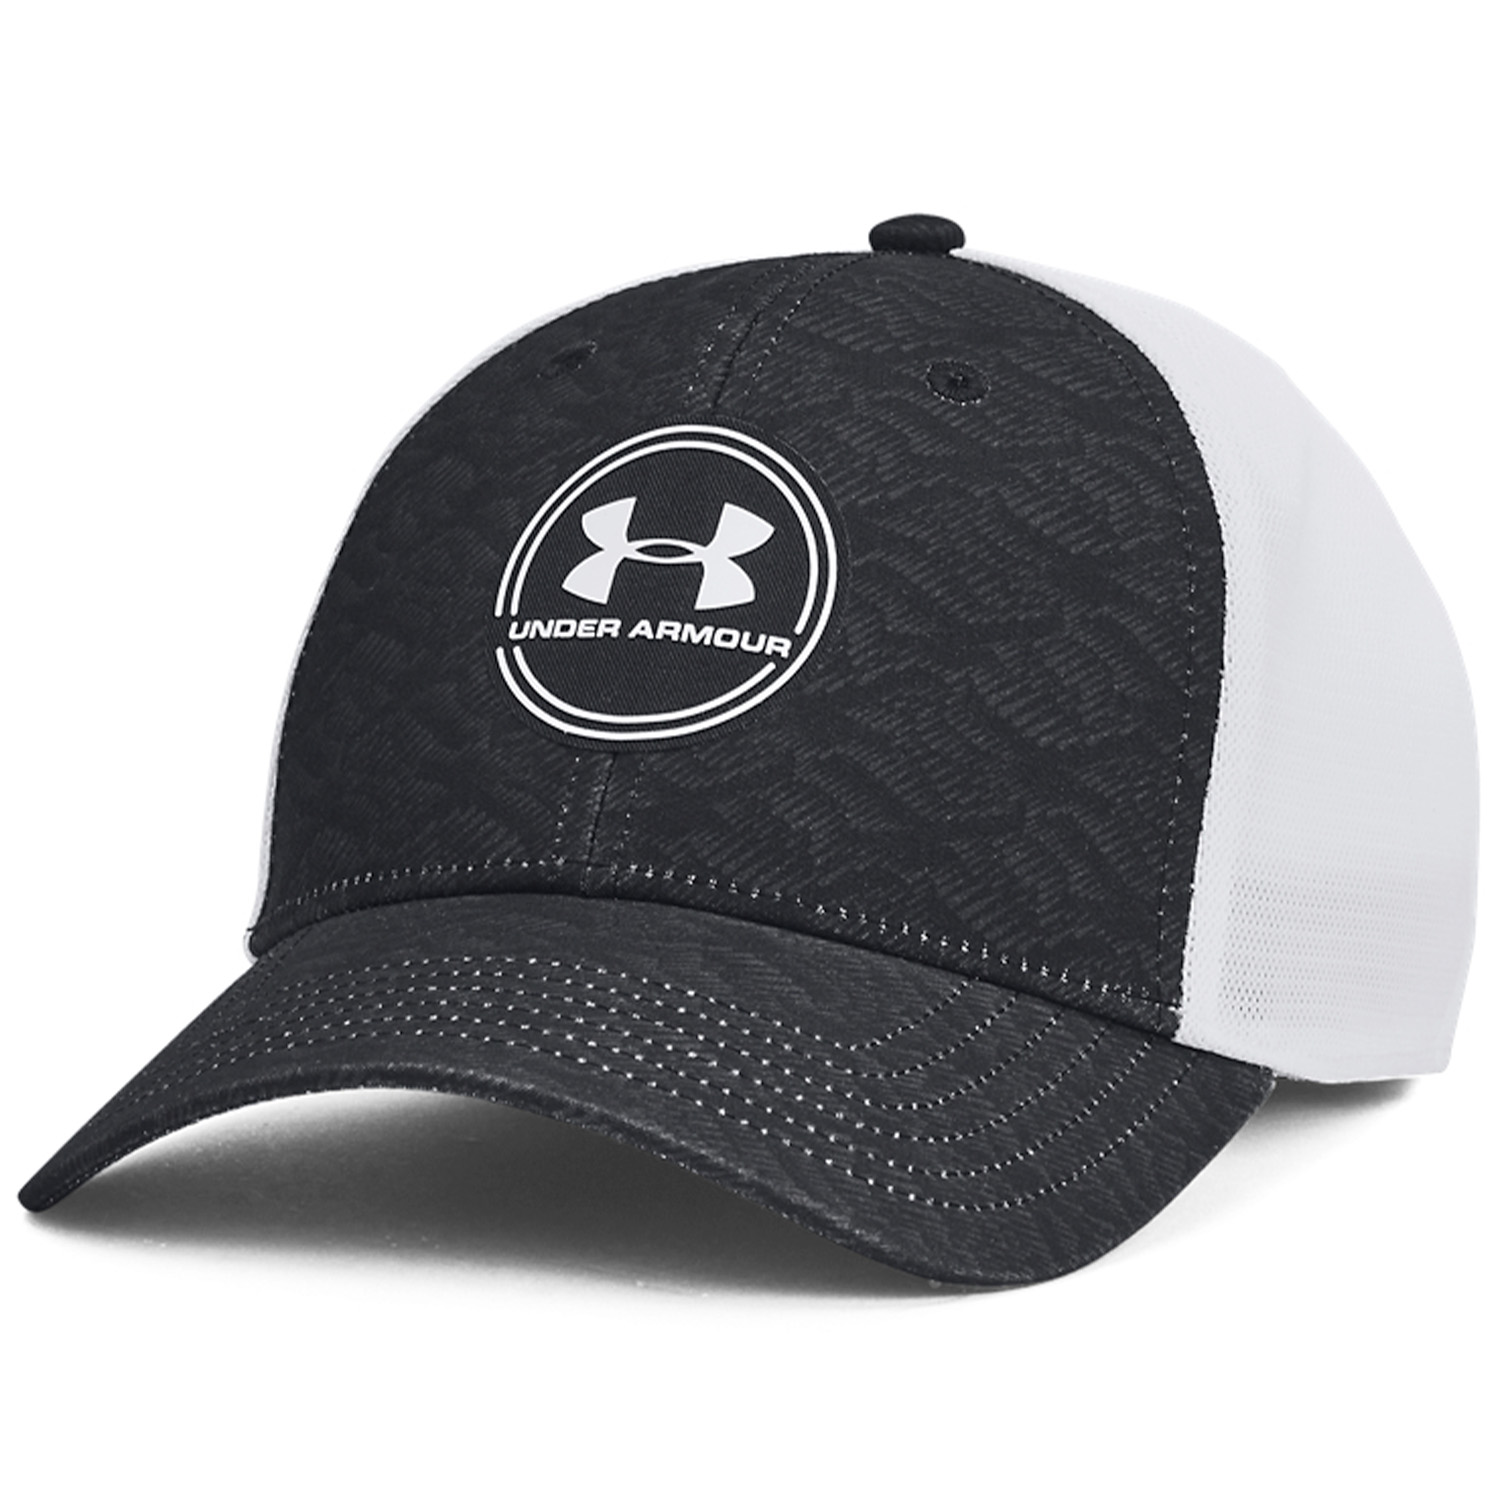 Under Armour Iso-Chill Driver Mesh Adjustable Cap Black/Black/White